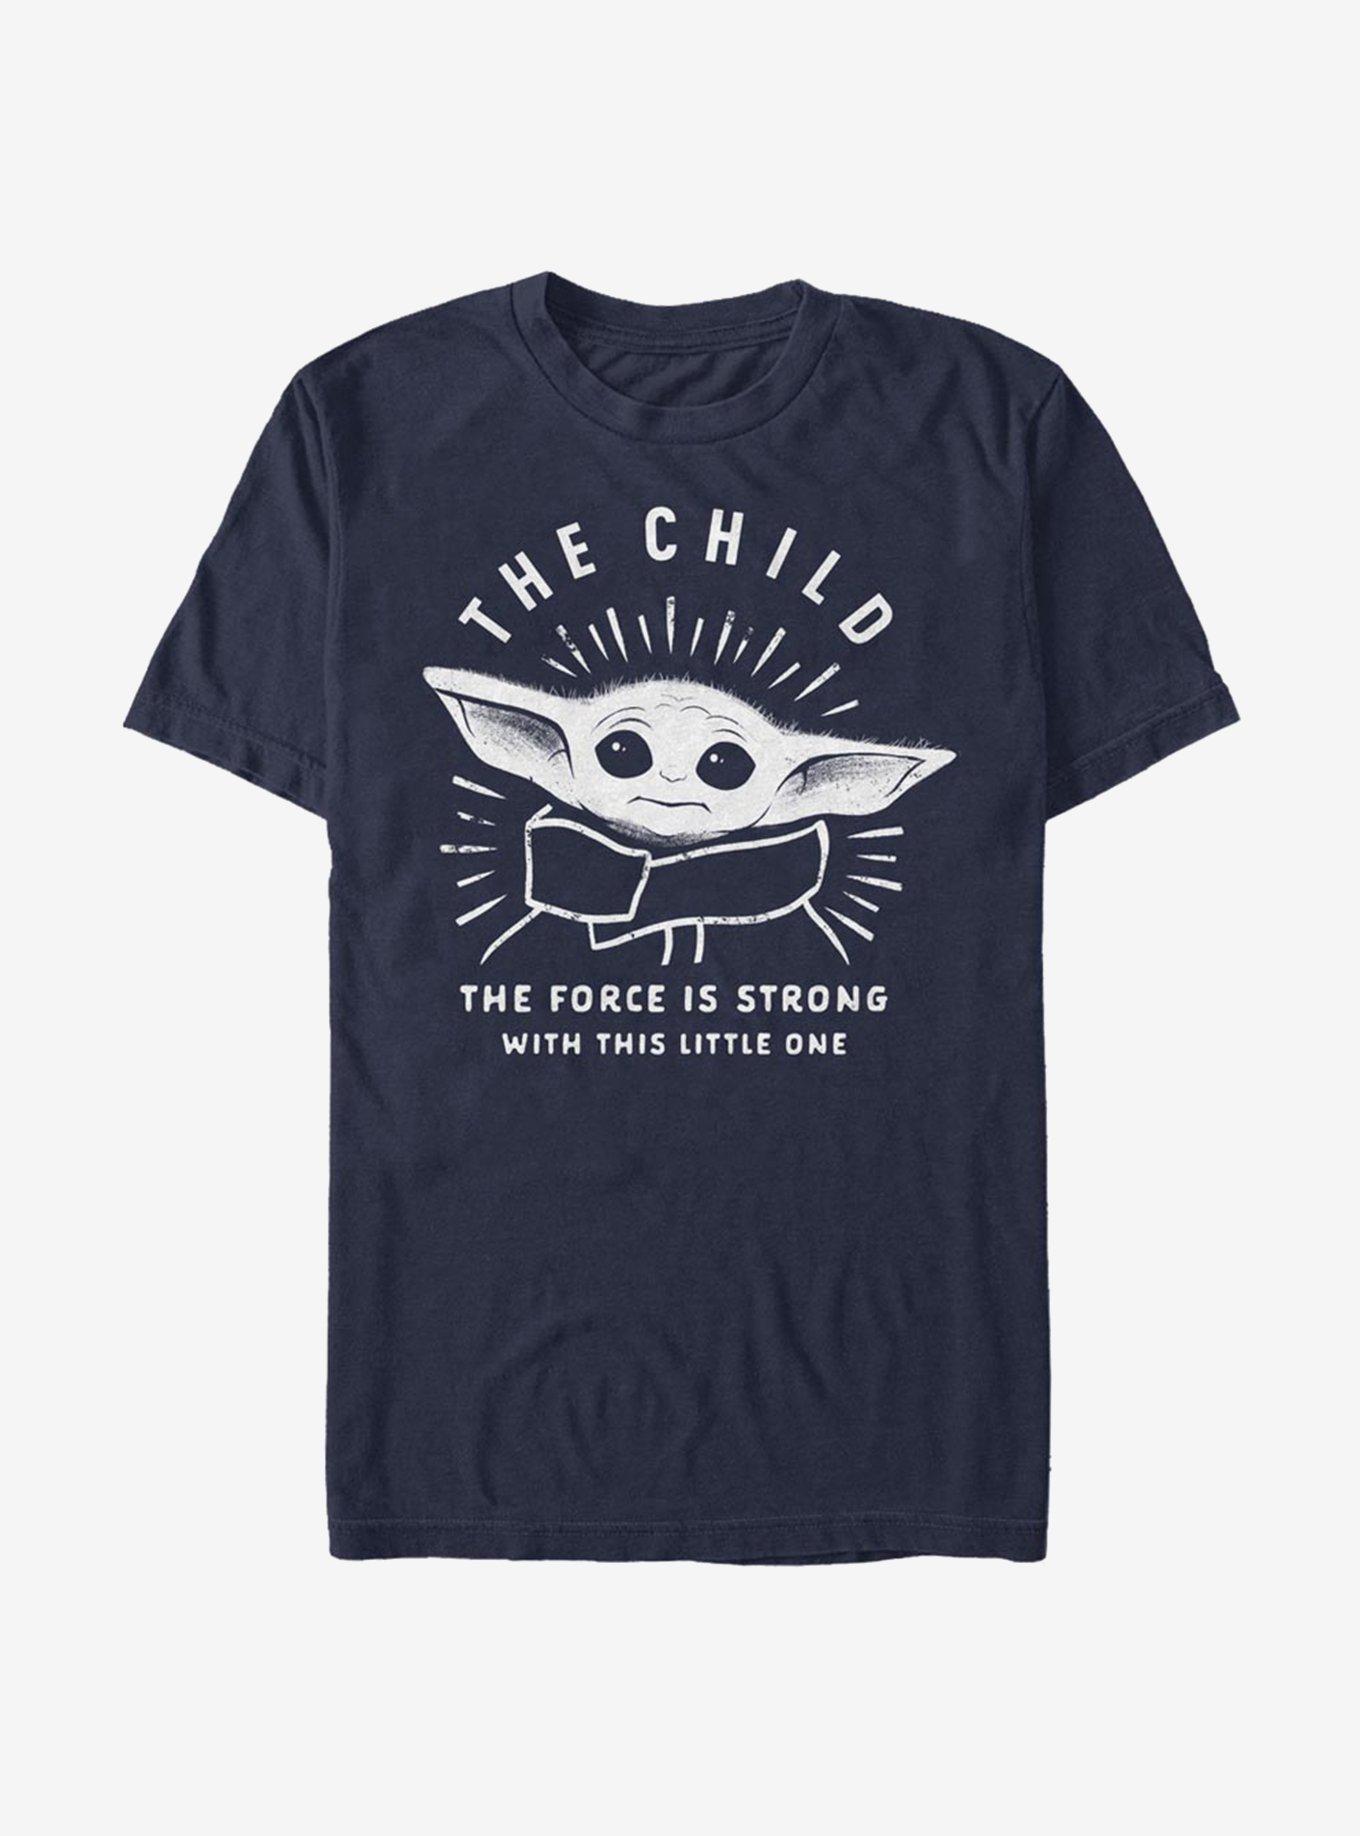 Star Wars The Mandalorian The Child The Force Is Strong T-Shirt, NAVY, hi-res